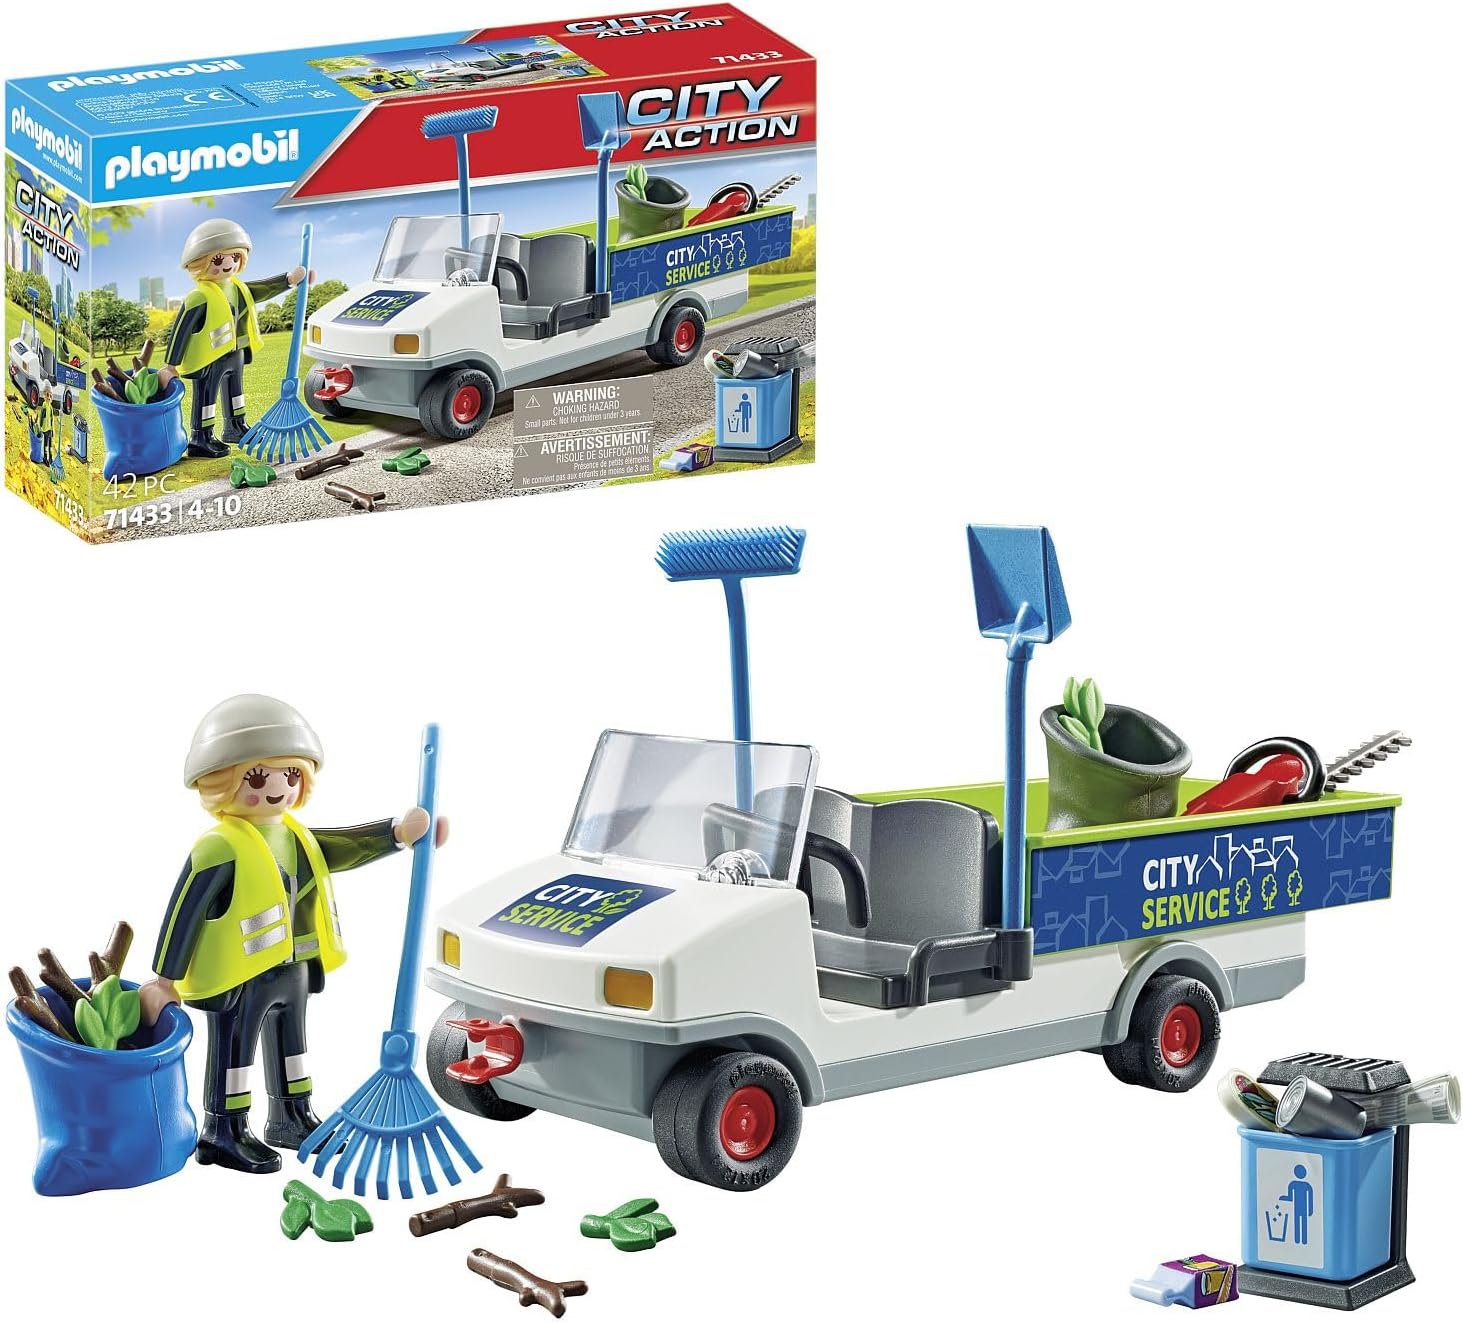 PLAYMOBIL City Action 71433 City Cleaning with Electric Vehicle, Loading Area for Rubbish Truck, Toy for Children from 4 Years